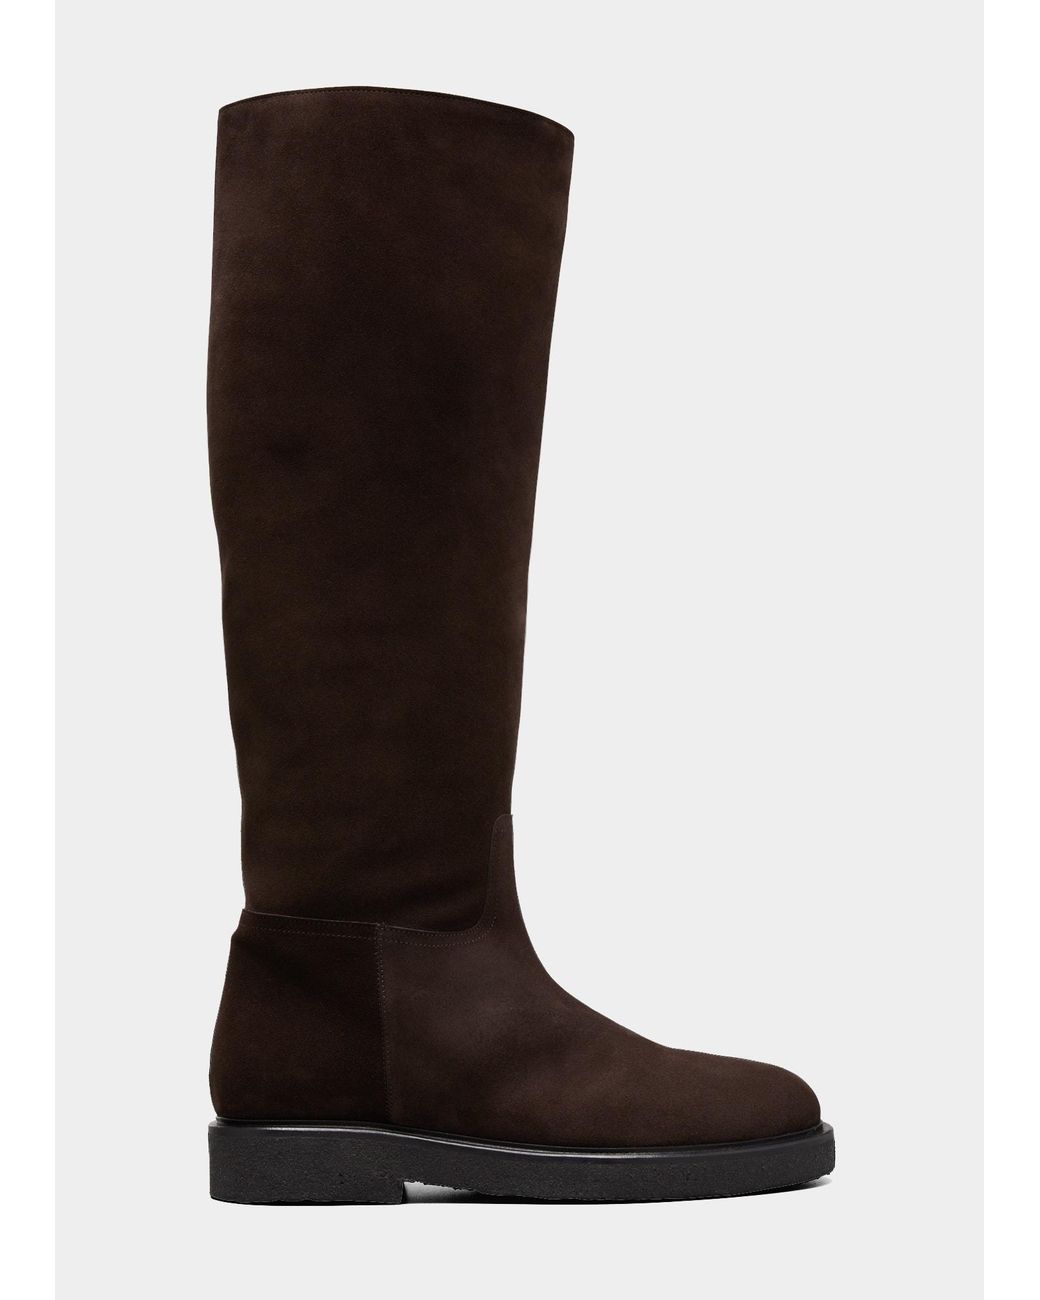 LEGRES Model 49 Suede Riding Boots in Brown | Lyst